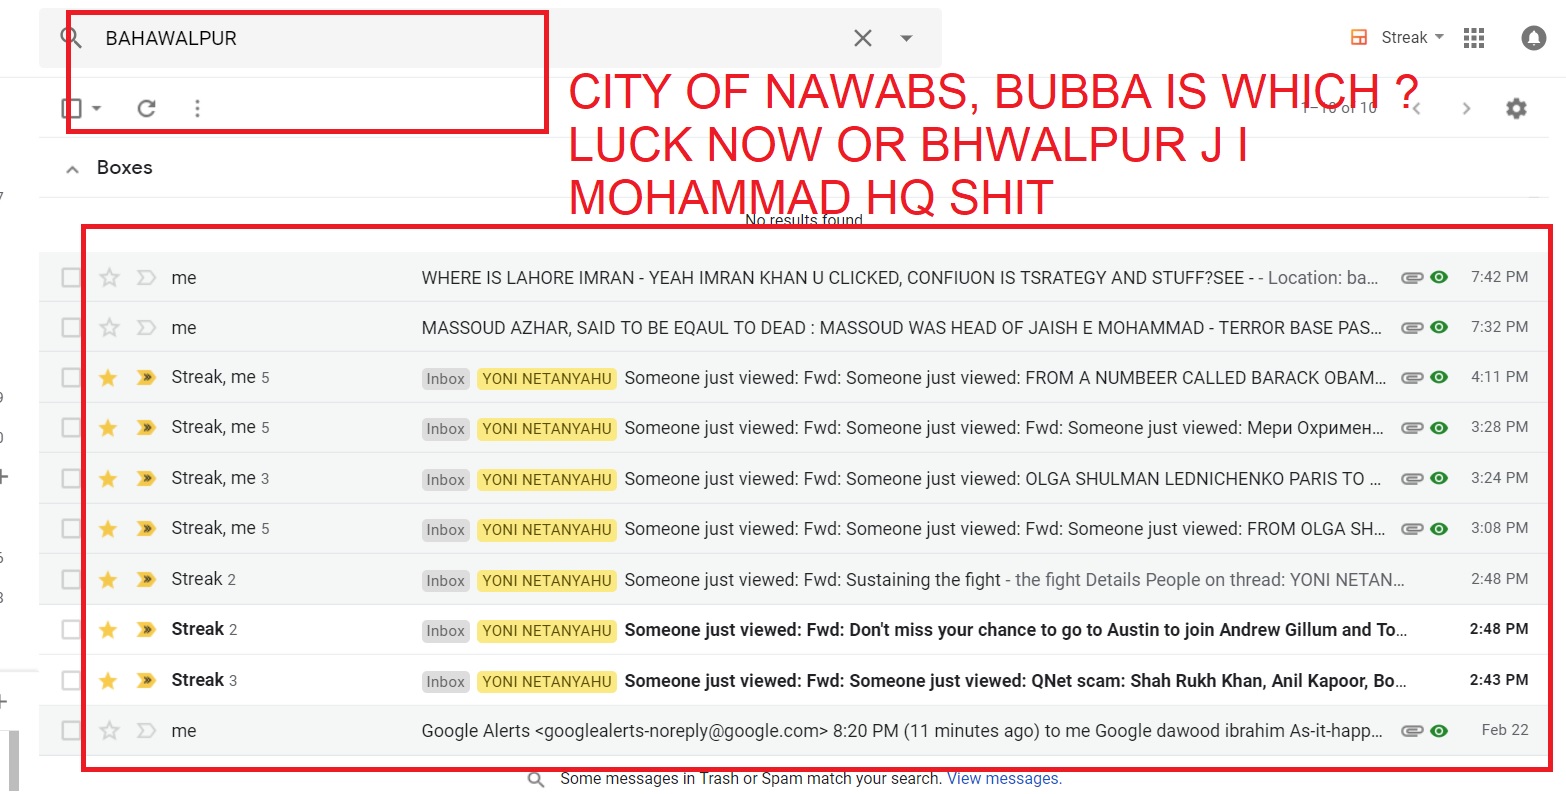 CITY-OF-NAWABS-FROM-LUCKNOW-TO-BHAWALPUR